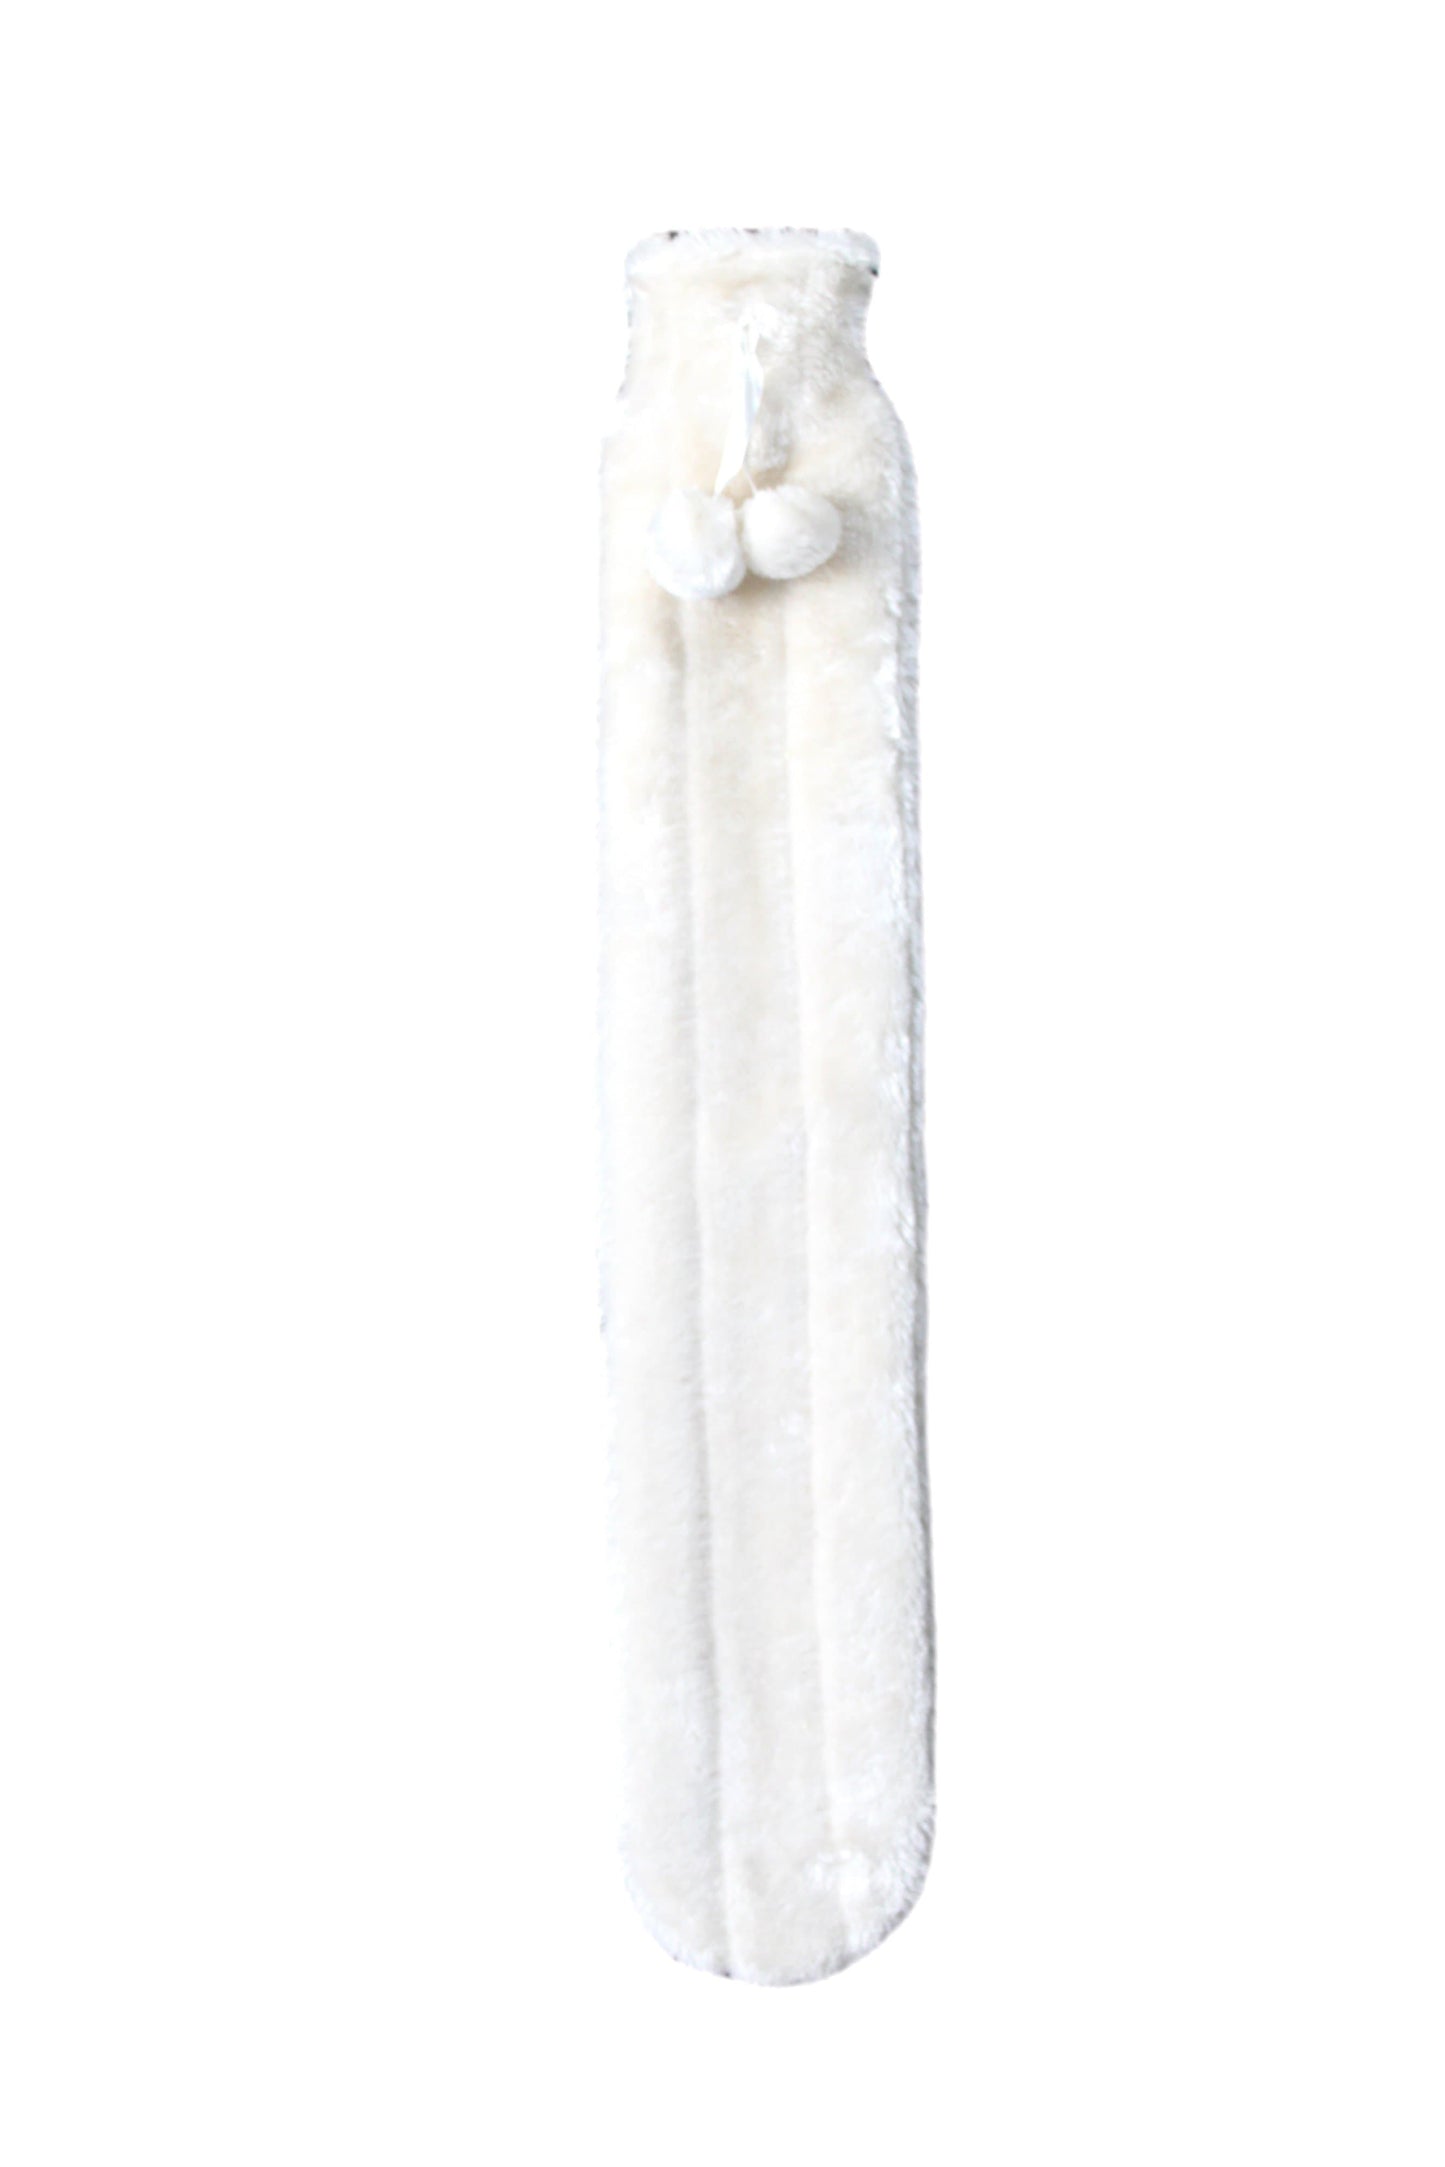 Faux Fur Pom Pom Extra Long Hot Water Bottle, 2L Capacity CREAM OLIVIA ROCCO Hot Water Bottle